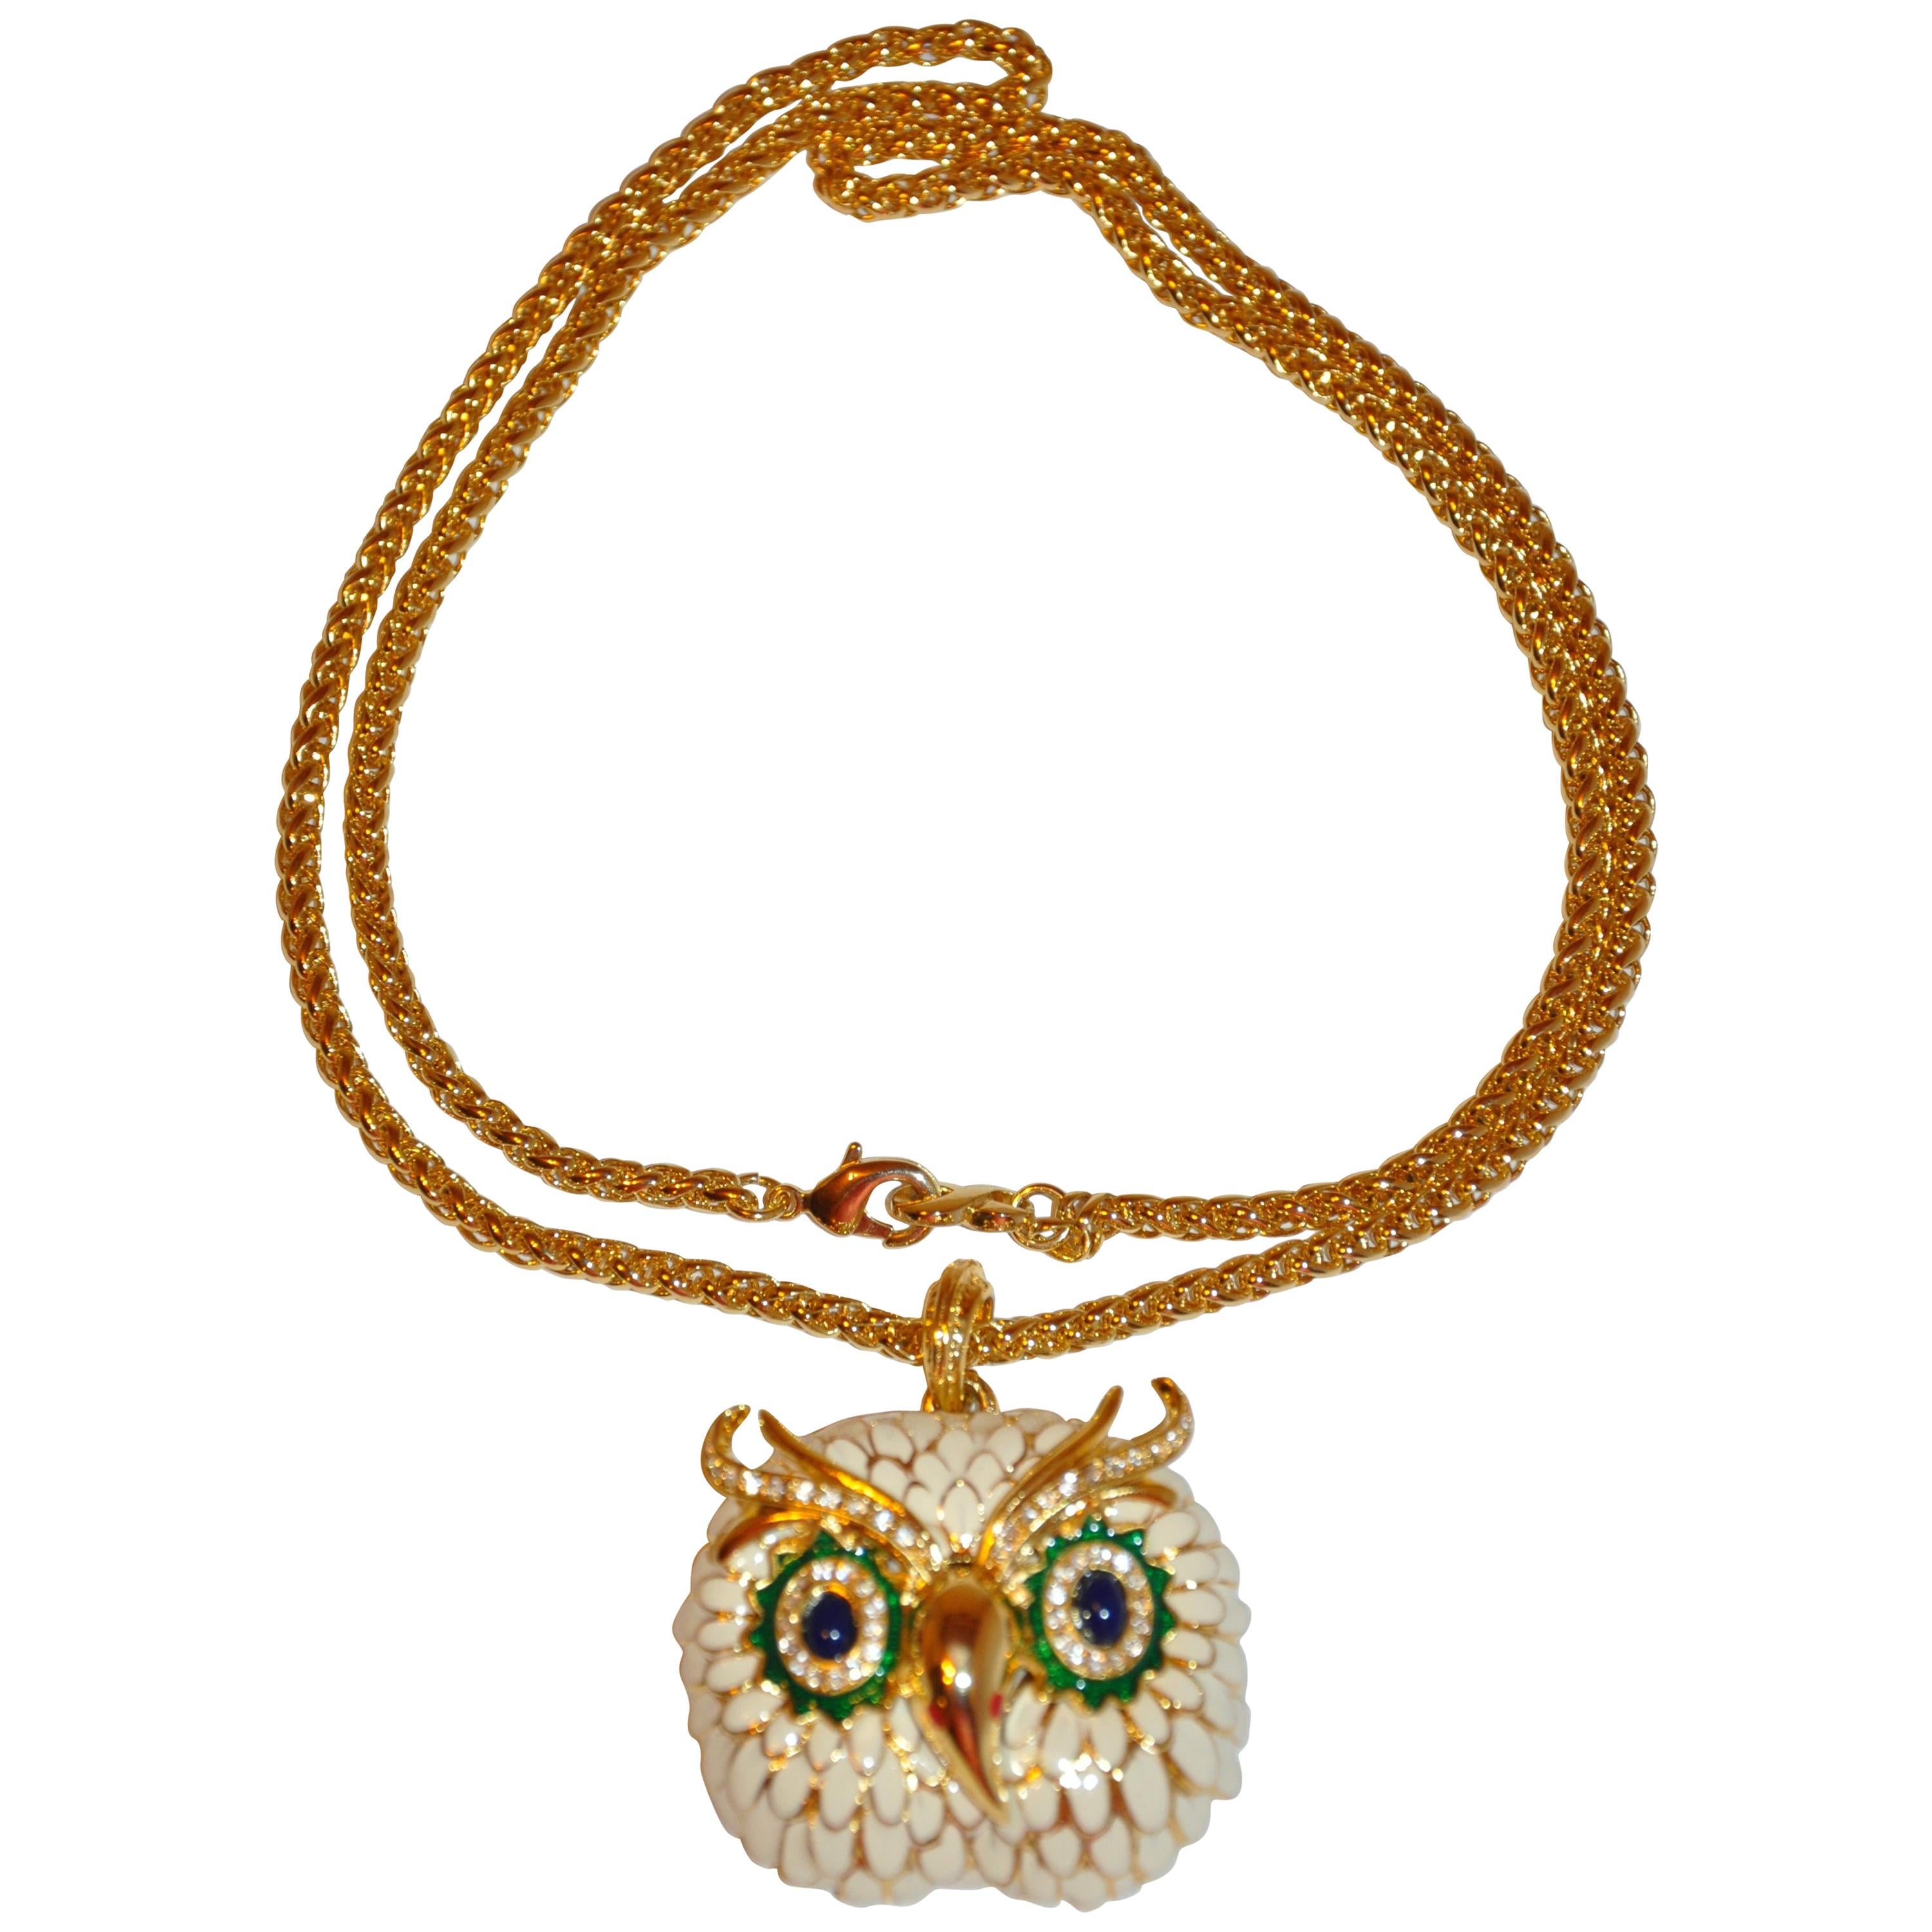 Kenneth Jay Lane MultiColor Enamel with Gilded Gold Hardware "Owl" Necklace